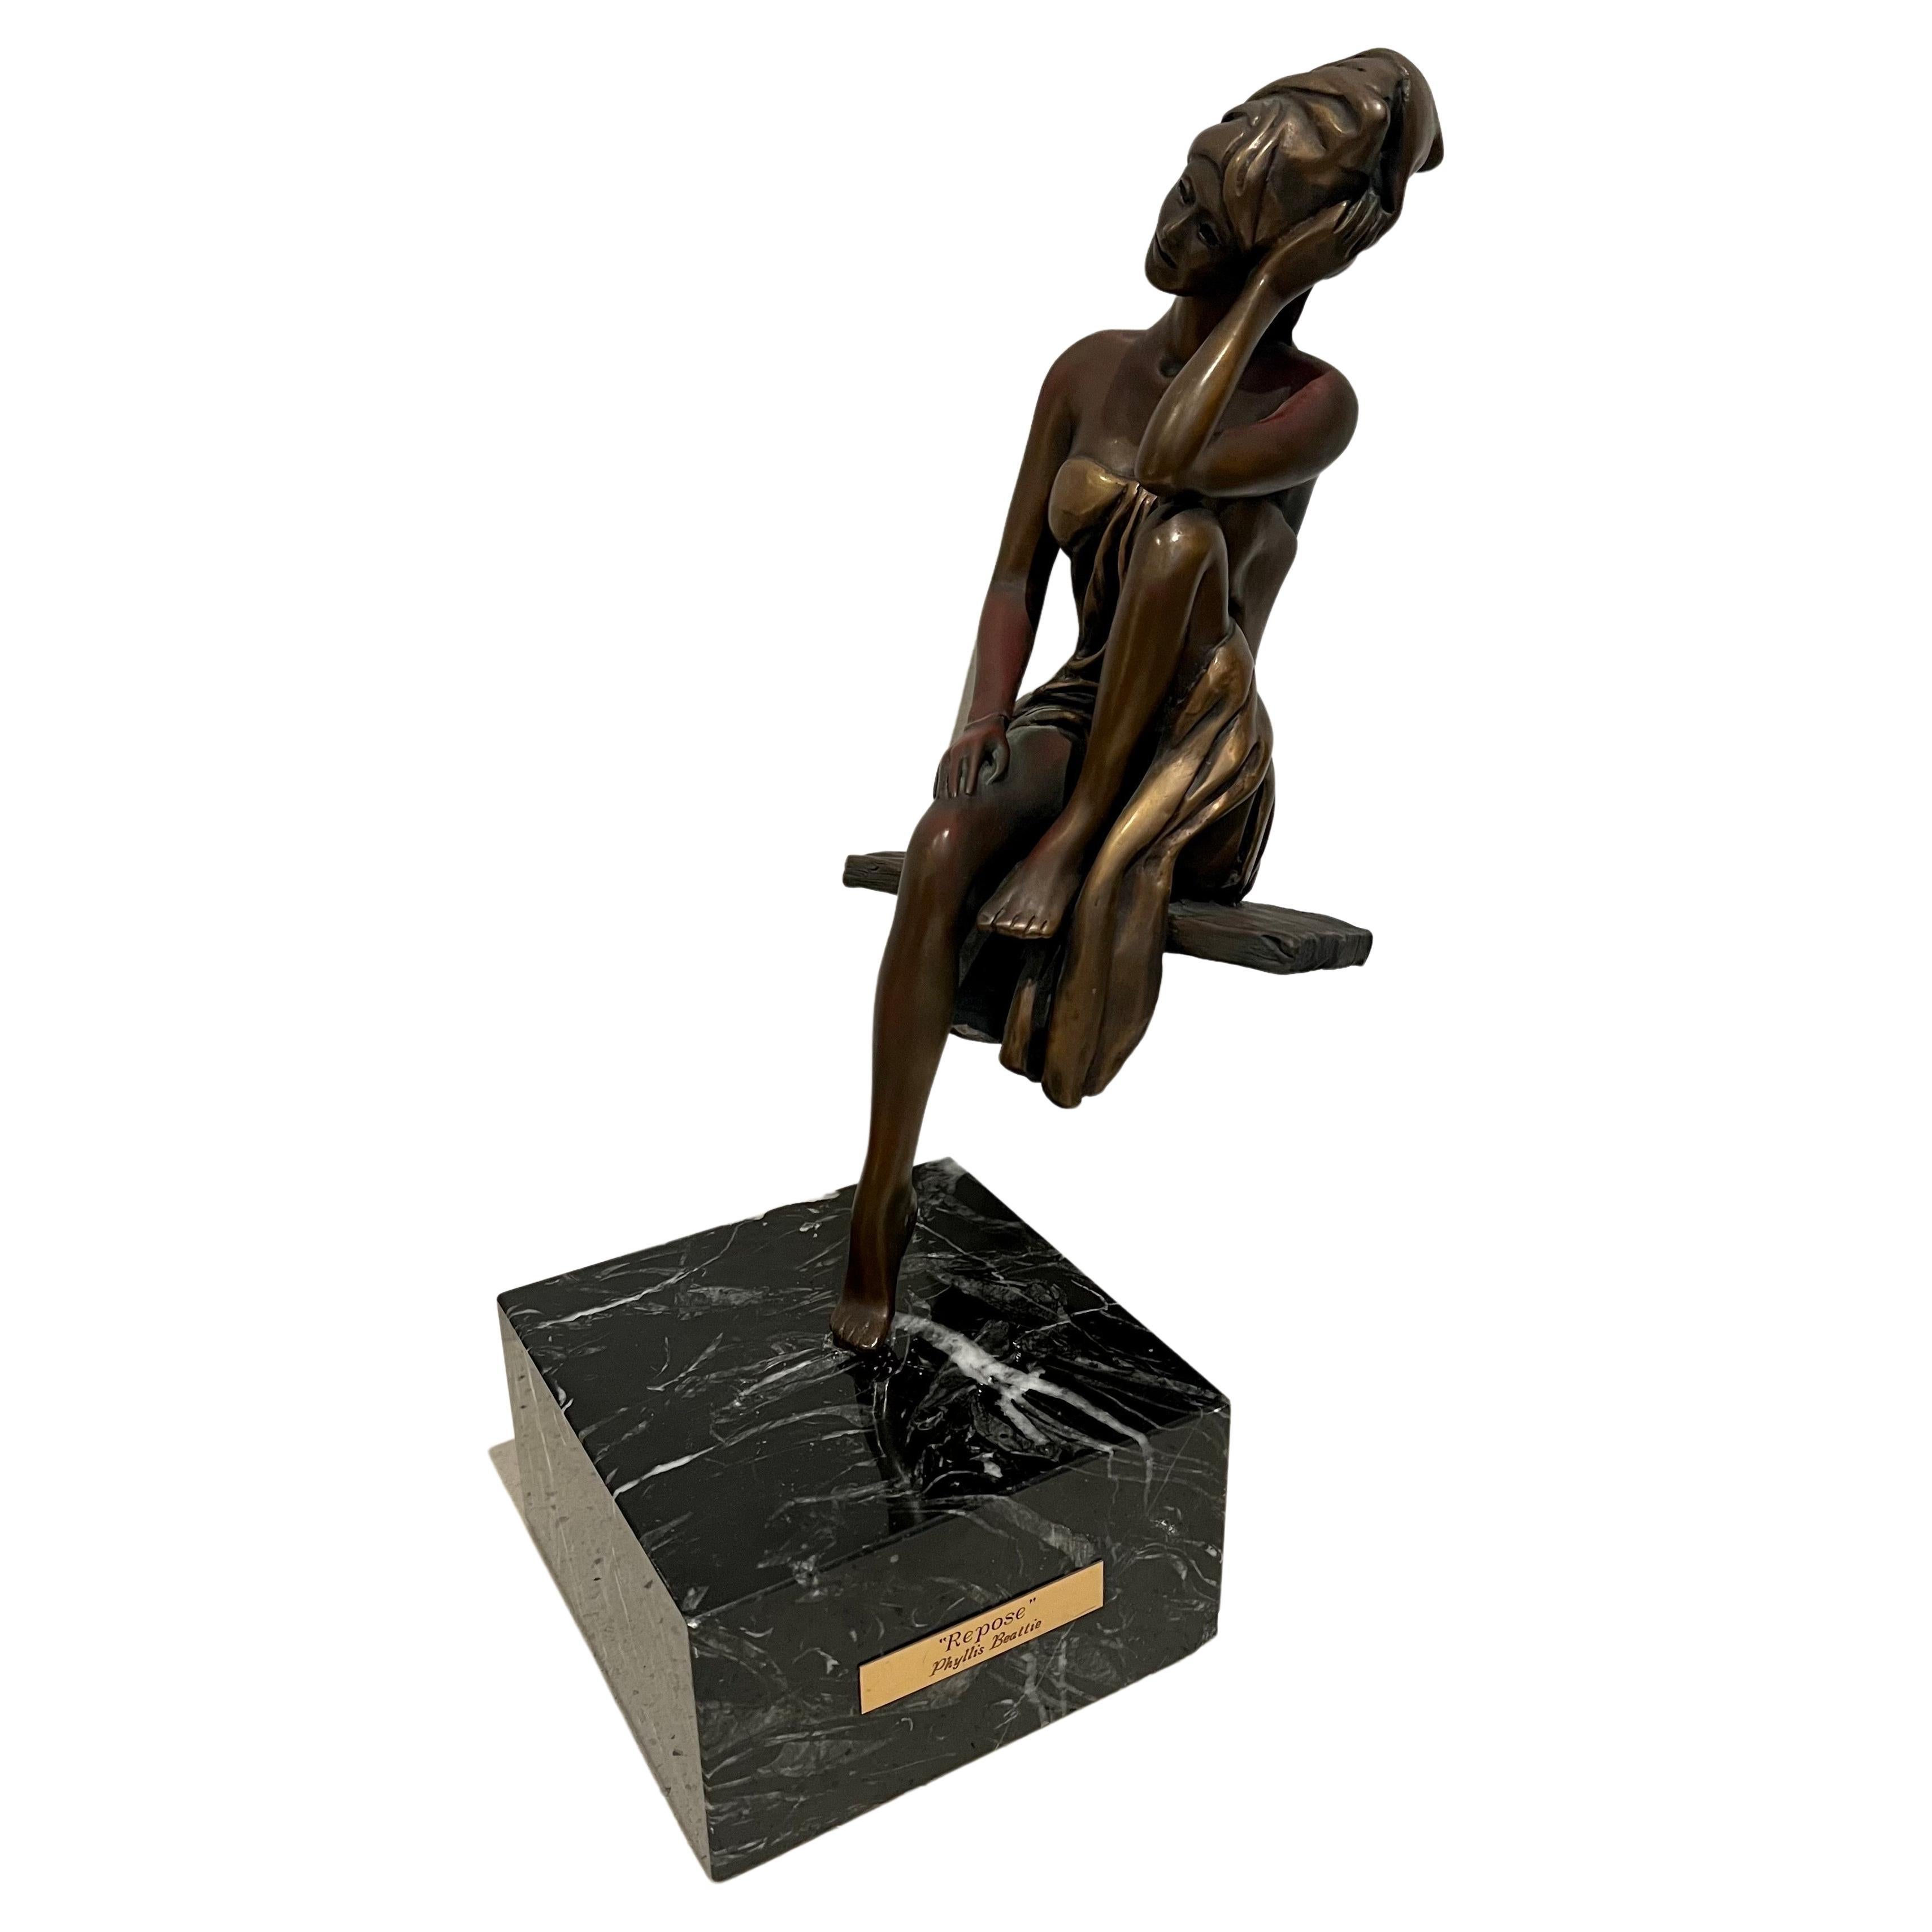 Beautiful sculpture in bronze by artist Phyllis Beattie, circa 1990's sitting on a solid black marble base, the figure pins and can be removed for easy shipping and handling.